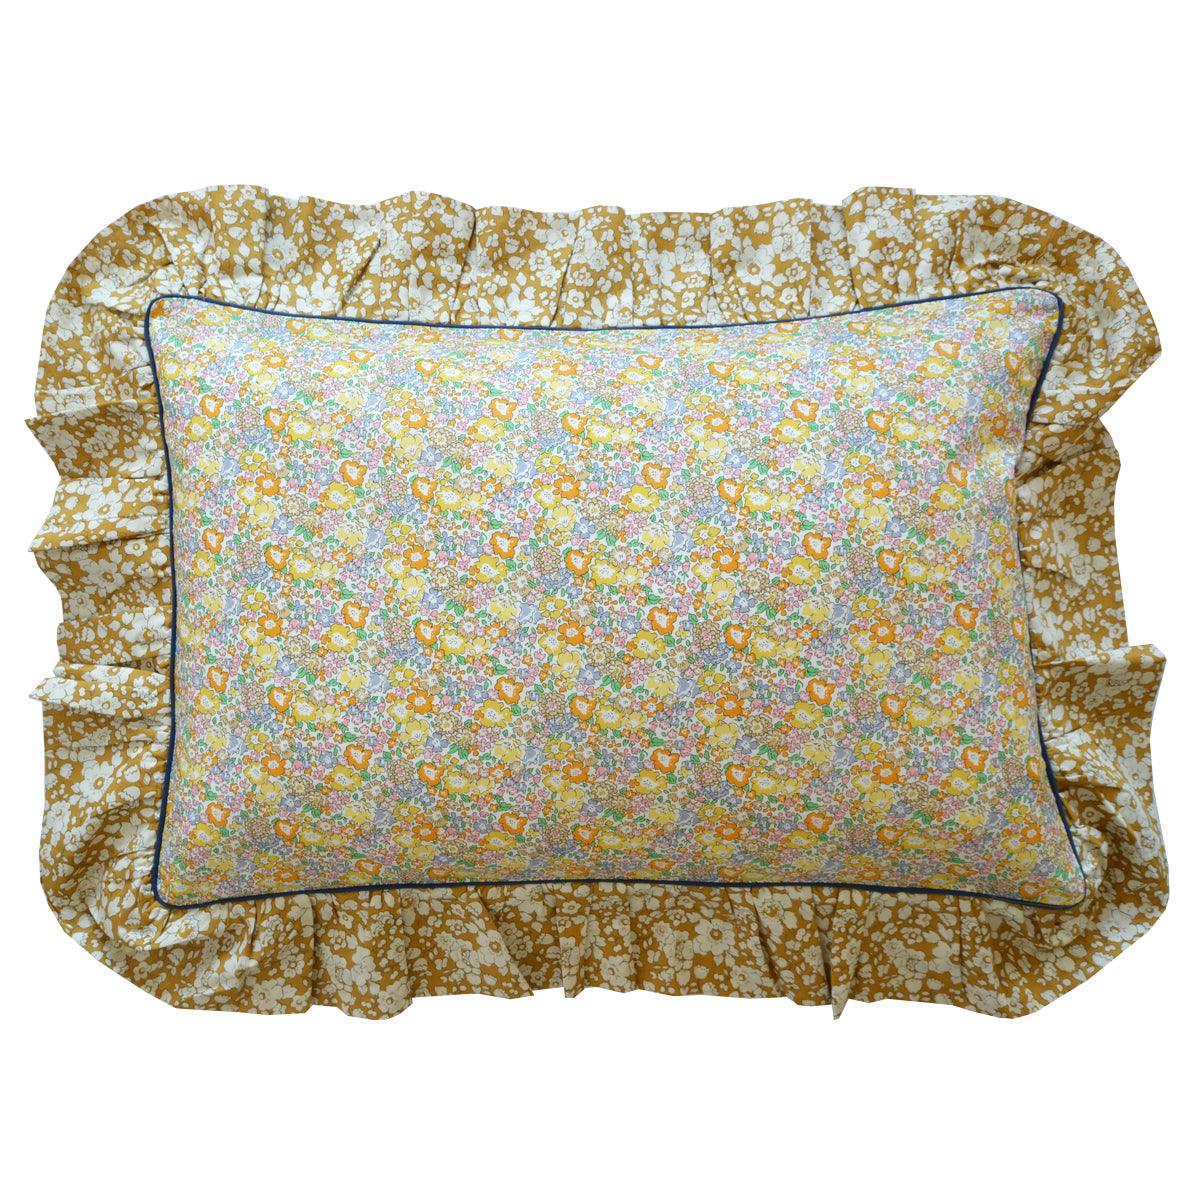 Piped Ruffle Cushion made with Liberty Fabric MICHELLE & BETSY BOO - Coco & Wolf